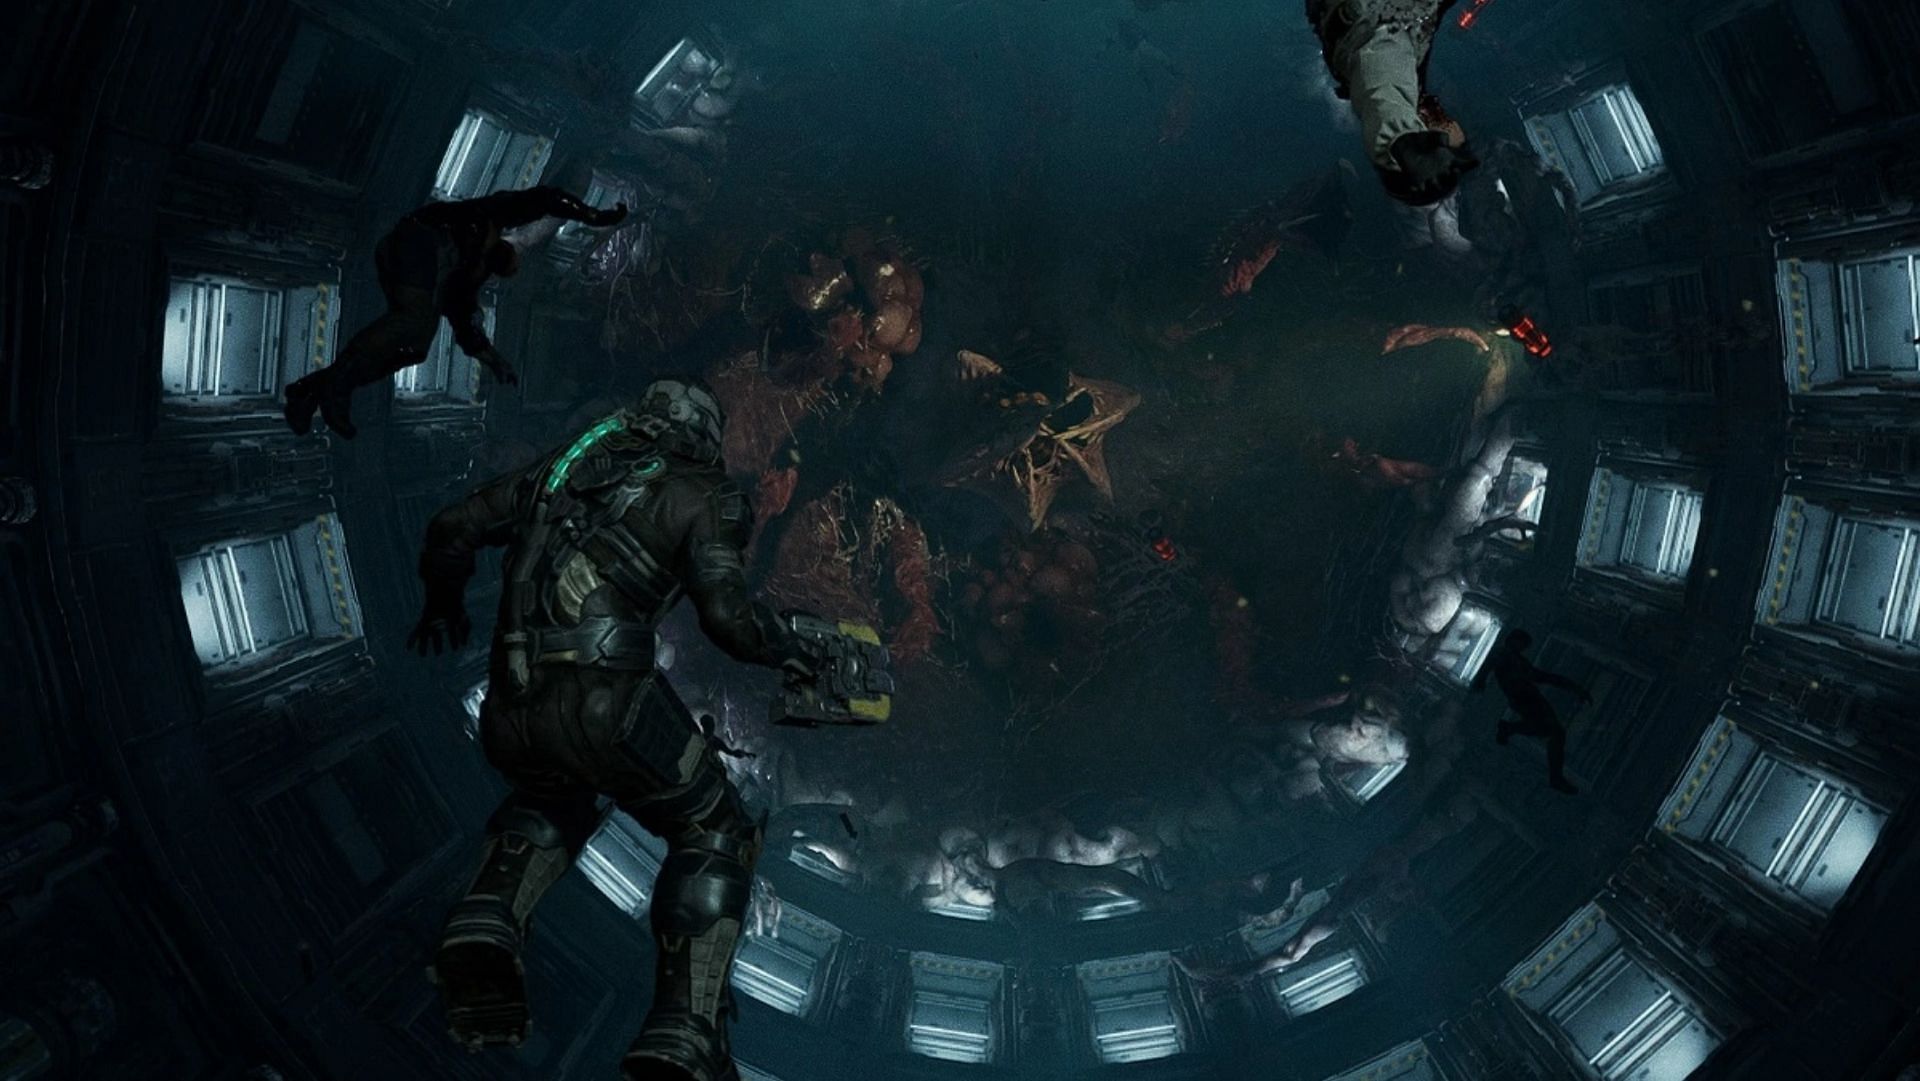 Thge Dead Space remake features a range of challenging boss fights (Image via EA/Motive Studio)